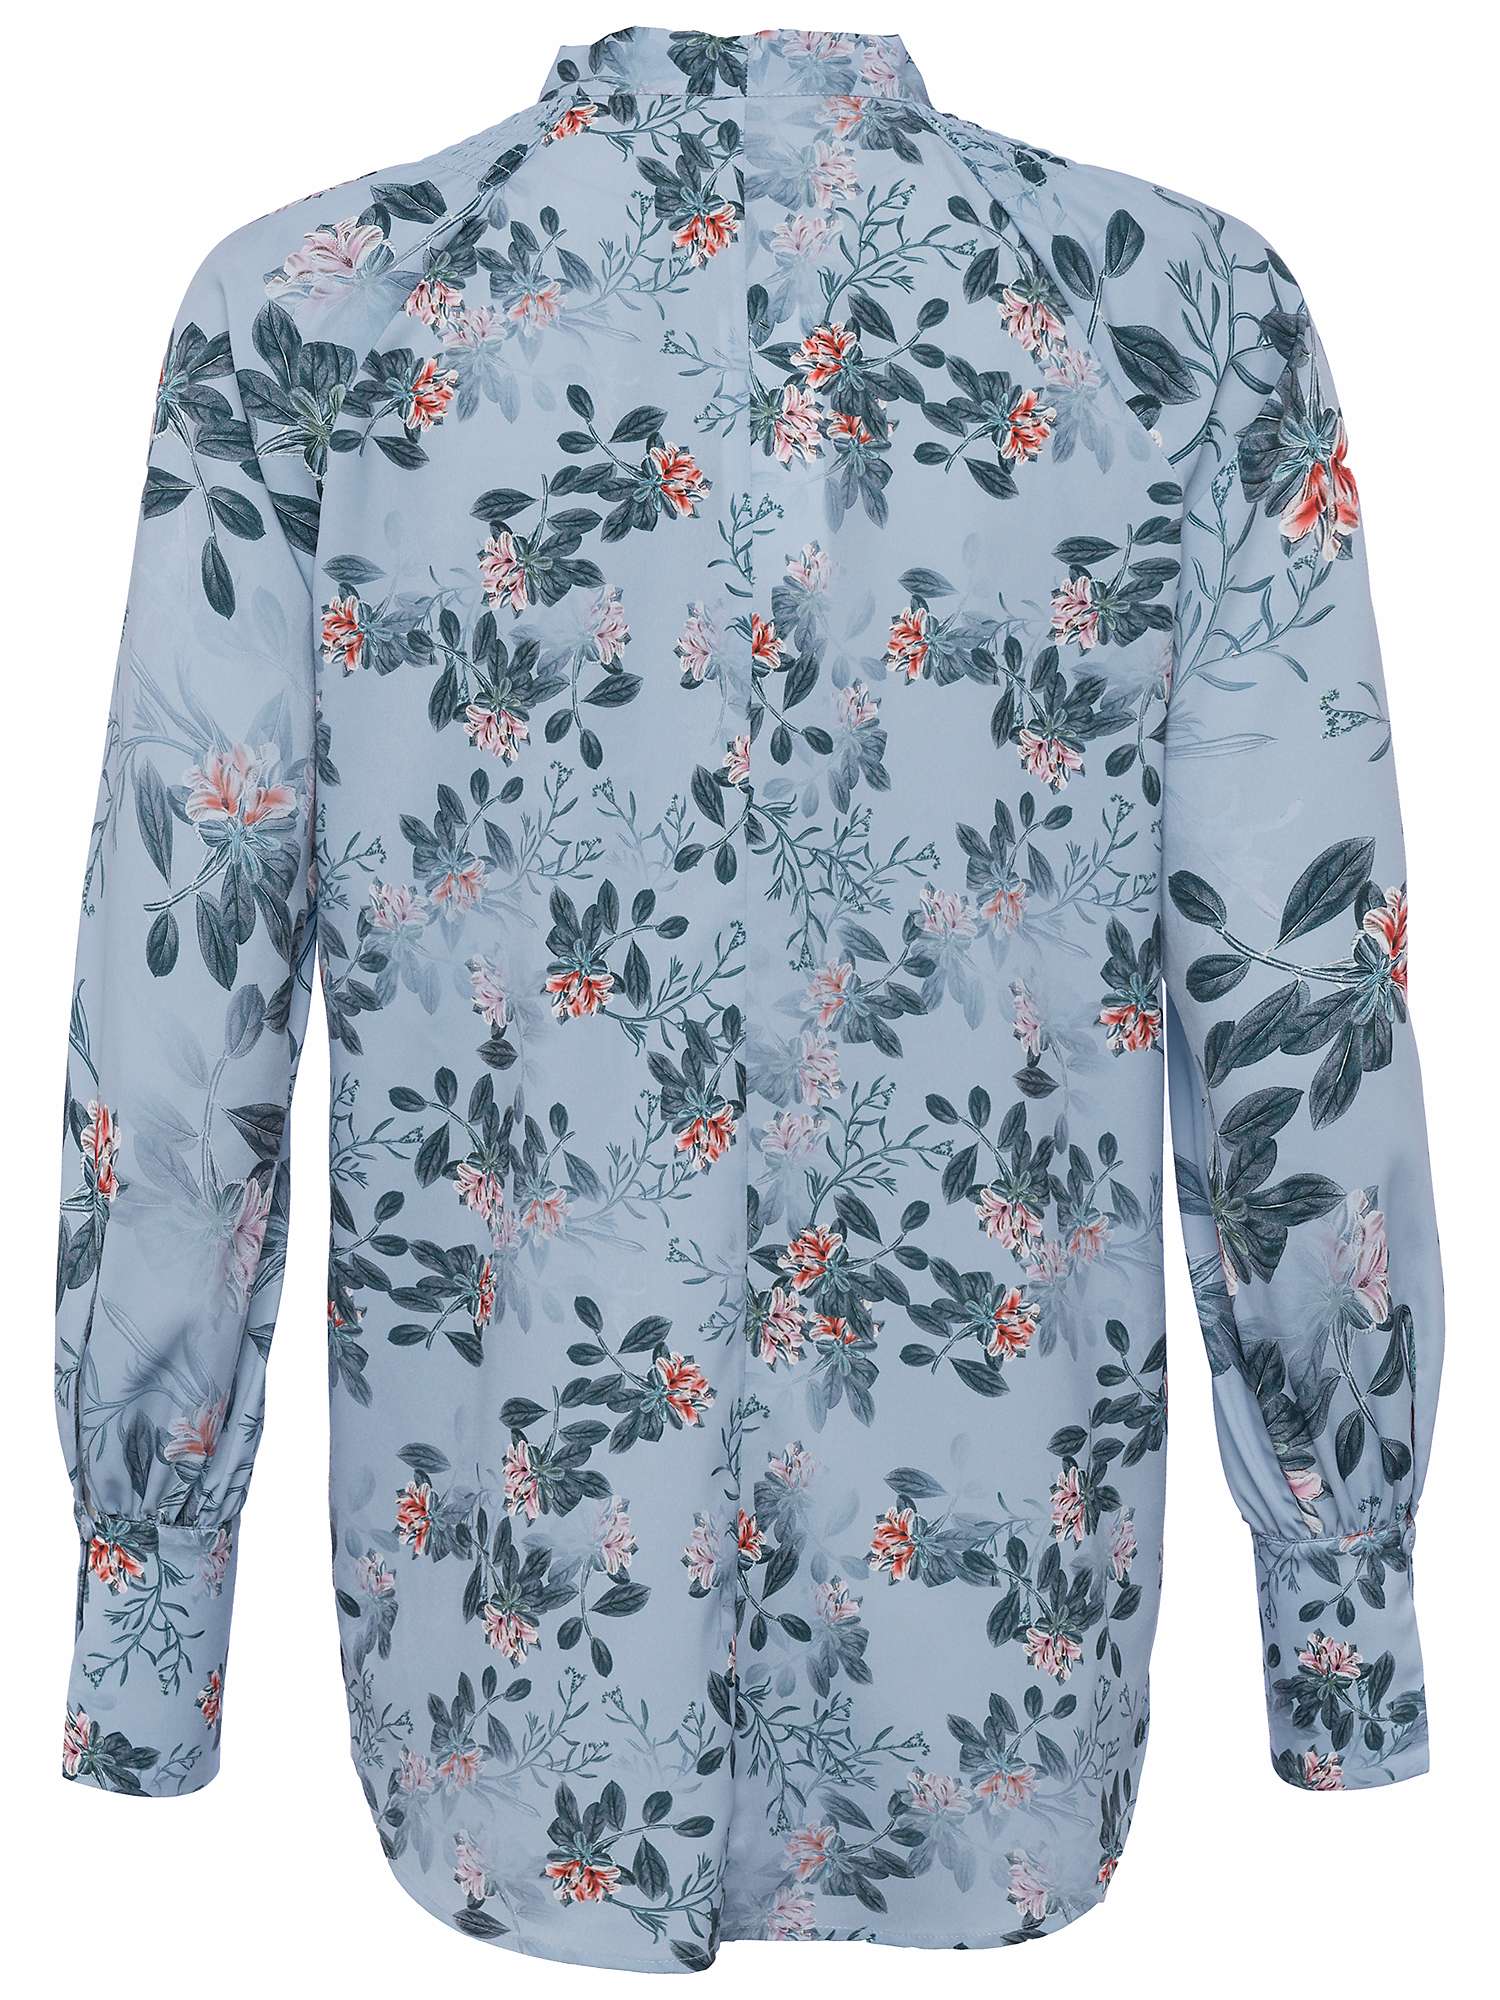 Buy French Connection Kioa Top Online at johnlewis.com